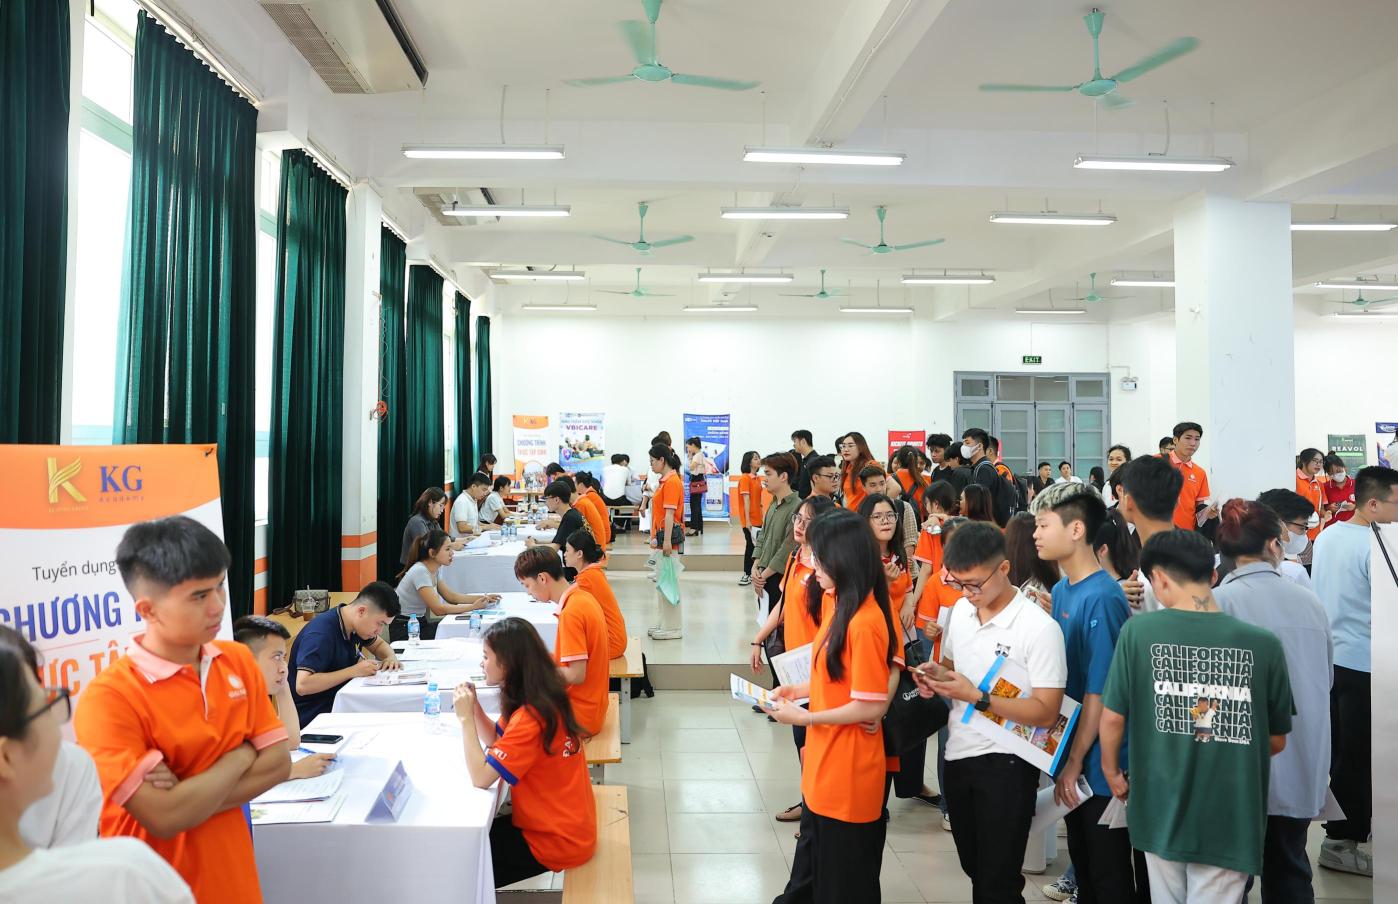 dai-nam-university-hosts-job-fair-2023-when-the-job-search-process-has-been-revolutionized-by-bringing-businesses-directly-to-campus